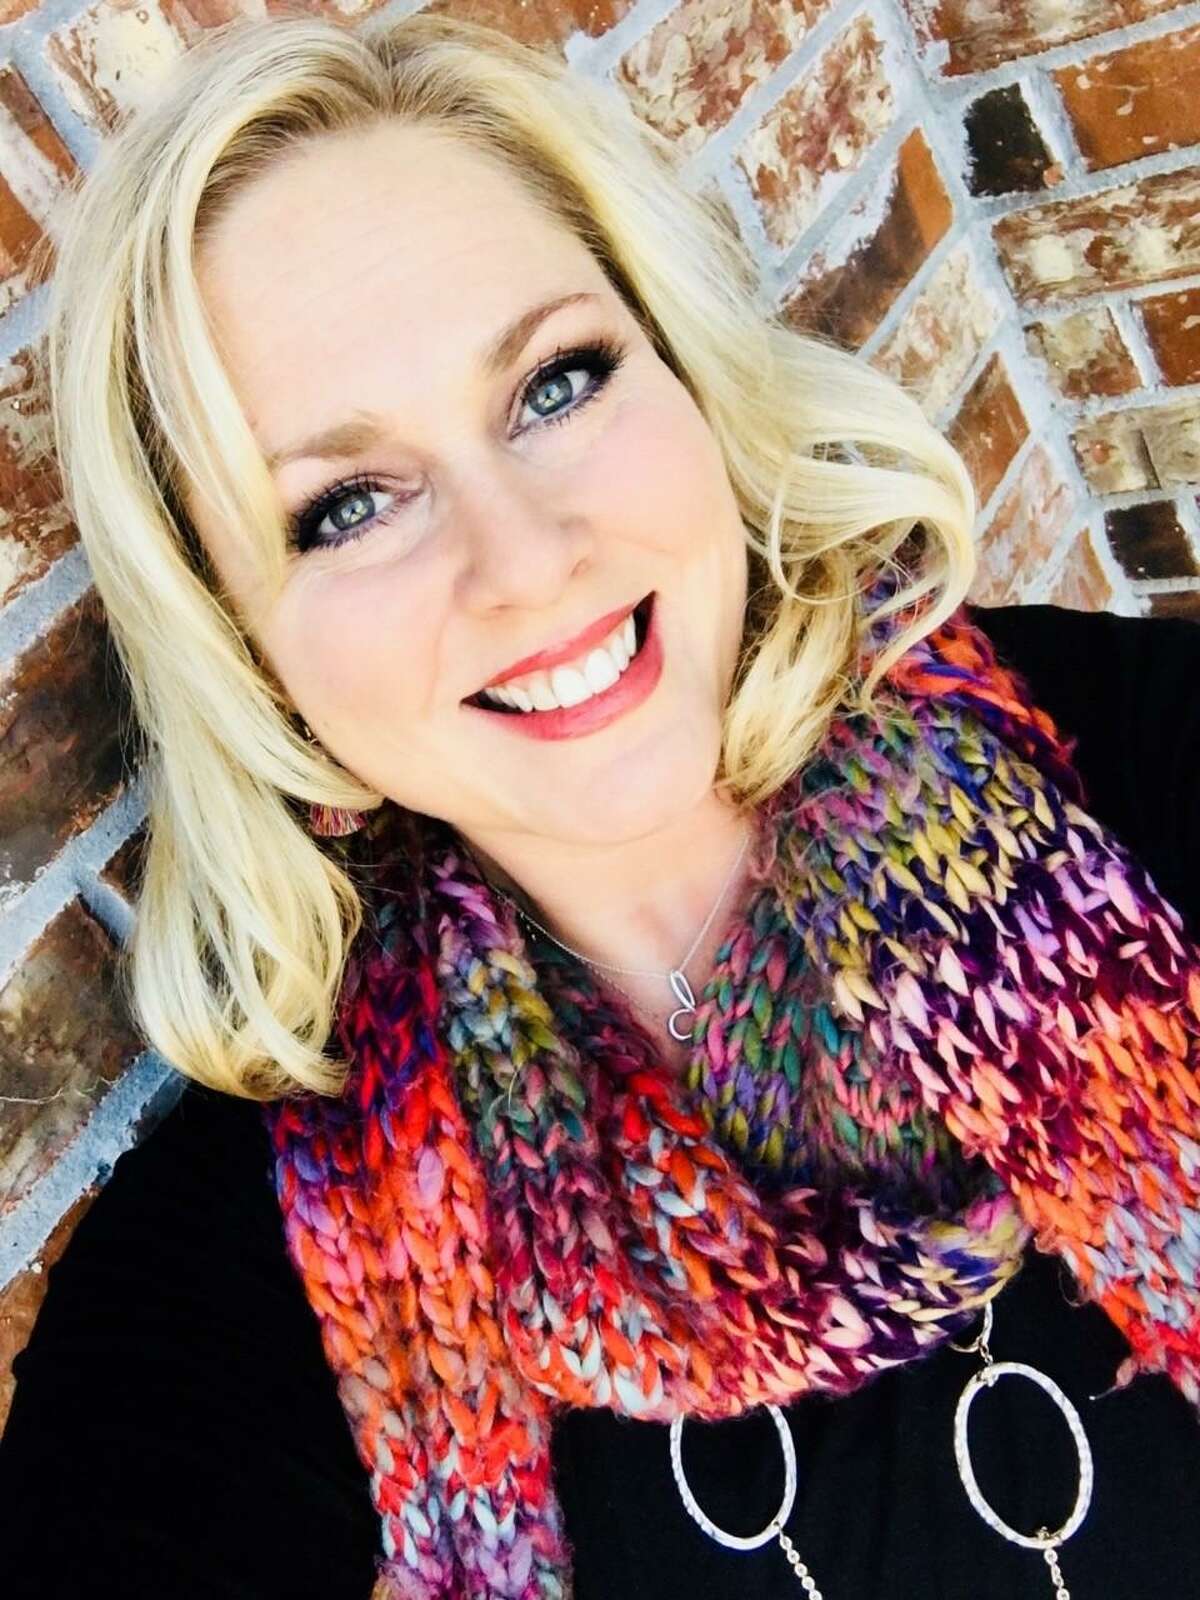 Danielle Scroggins is a North Texas writer whose work began appearing in the Beaumont Enterprise in February 2019. danirhea.com